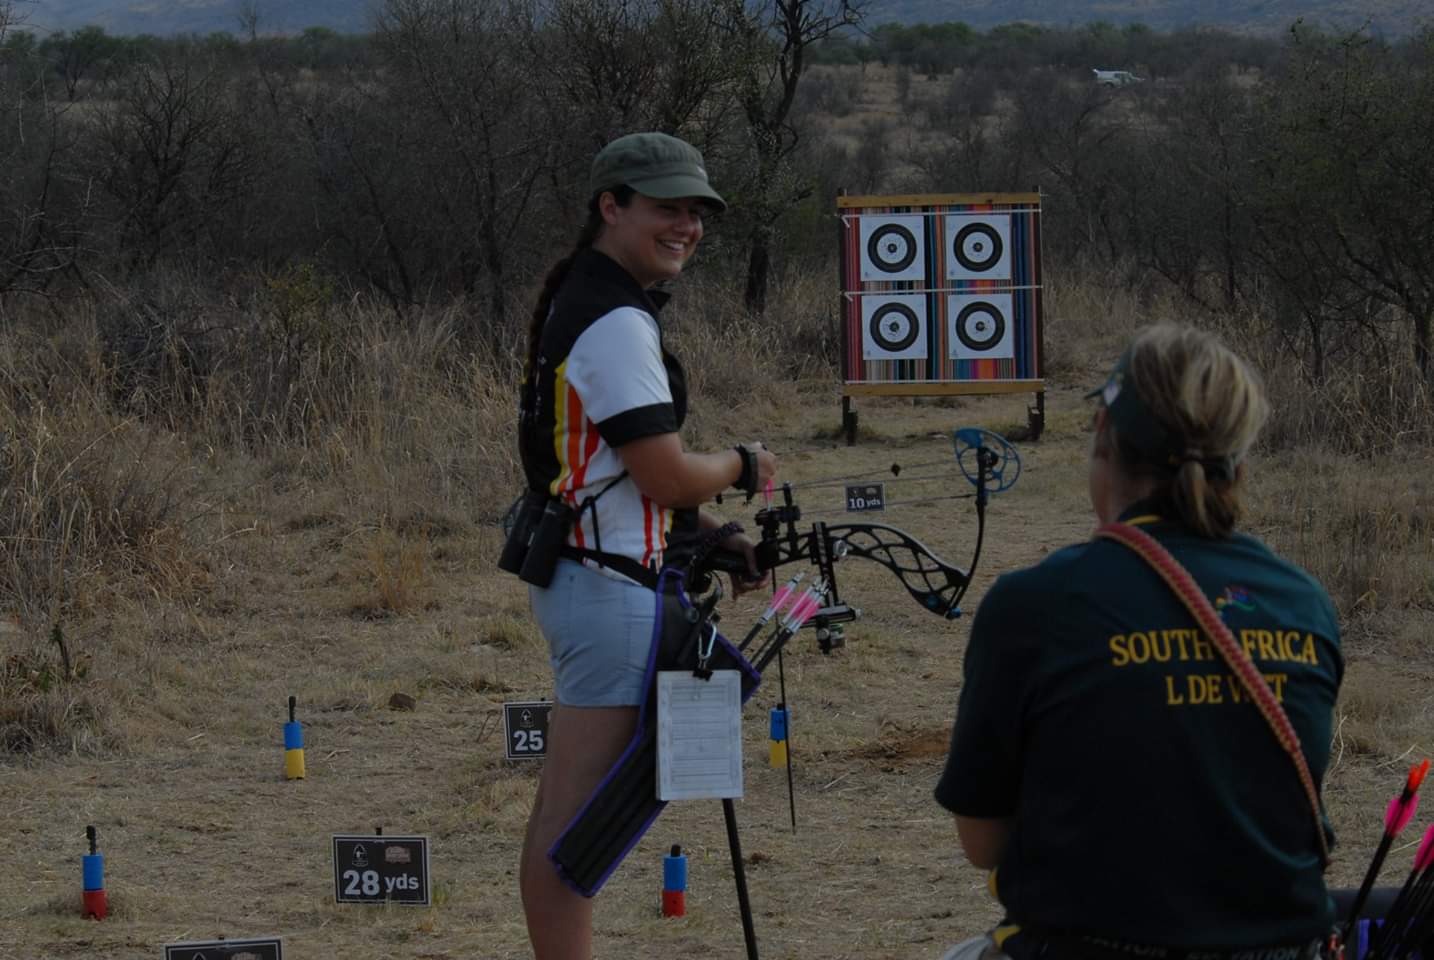 Joanette Karsten of the Polygraph Institute of South Africa representing the country in the World Field Archery Championships 2018.